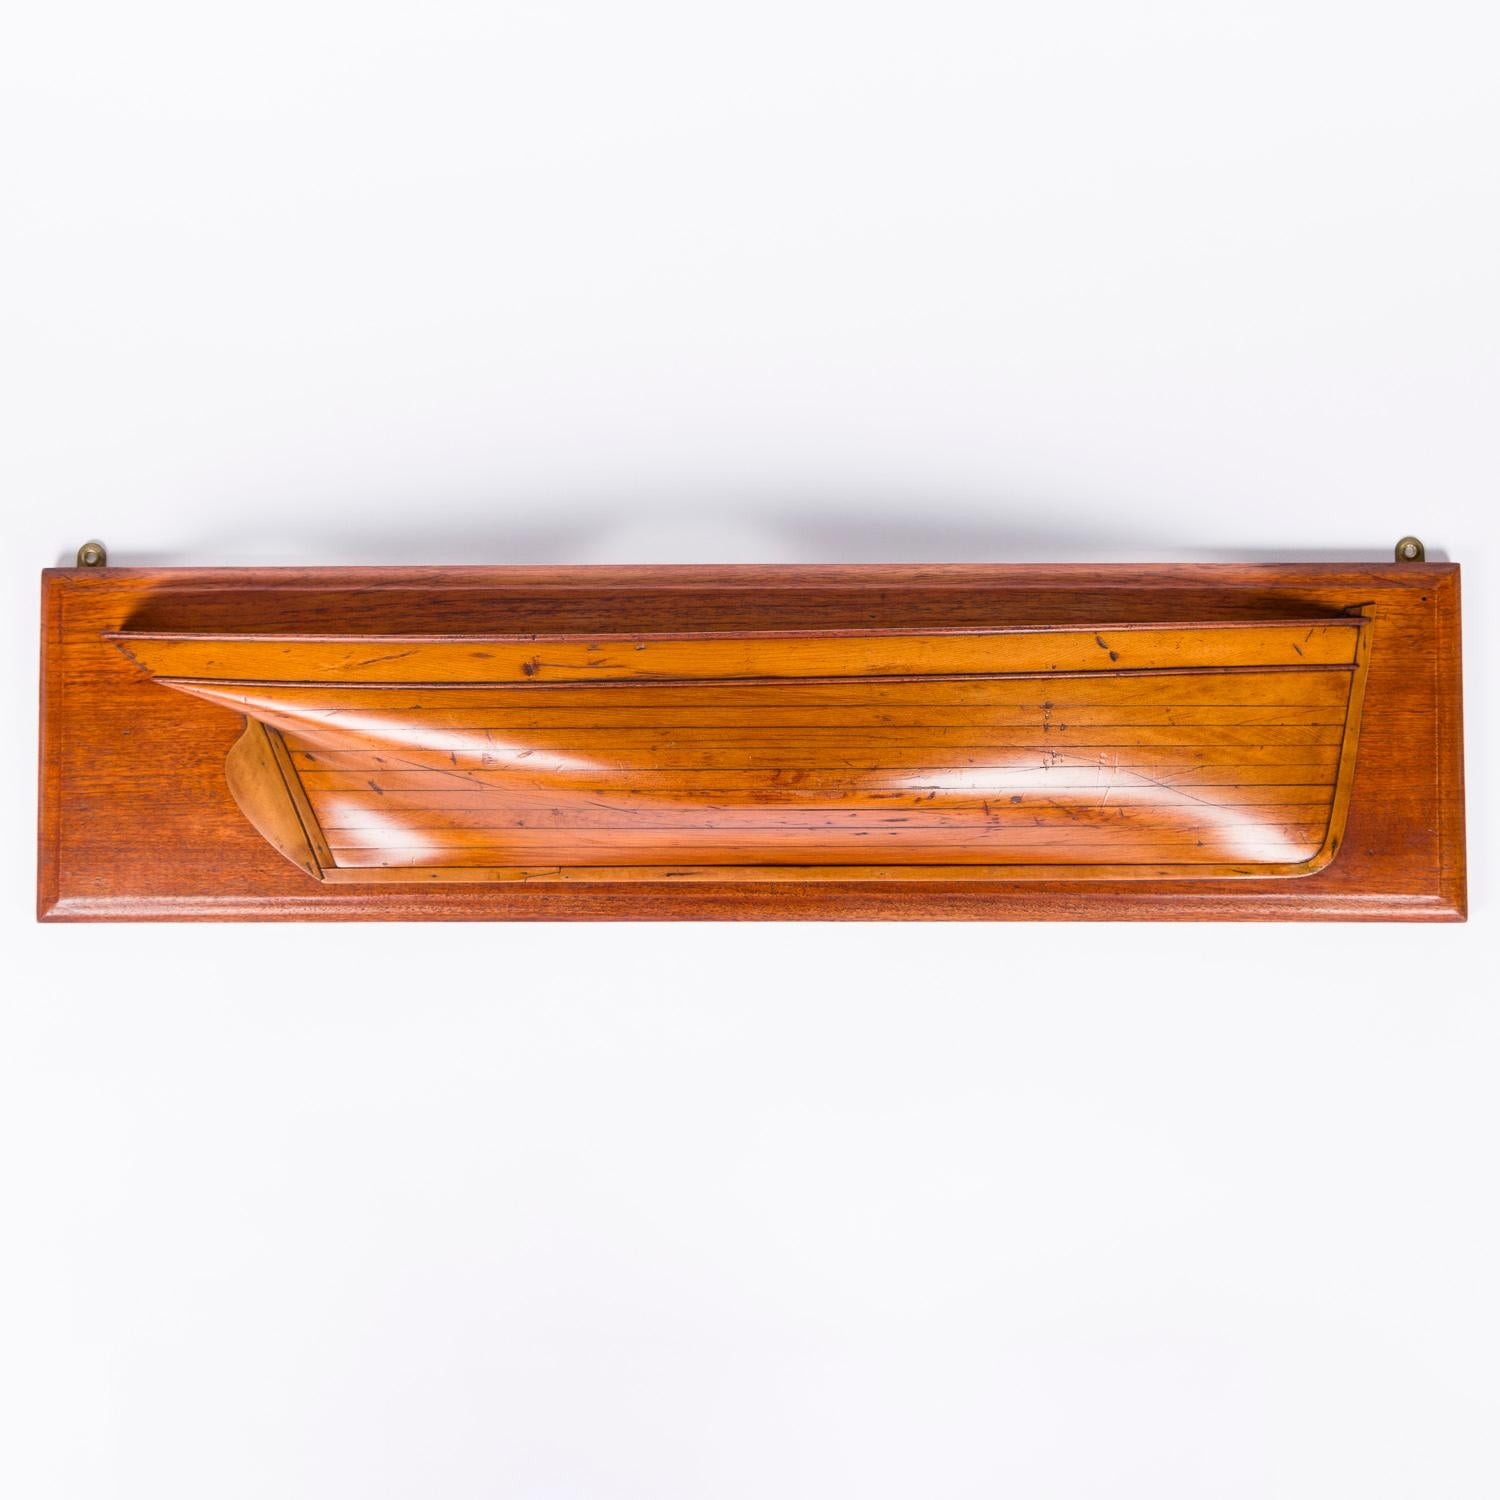 A late 19th century half block model of the starboard side of a Barque, circa 1880.  

The hull is made from laminated sections.

The teak backboard has brass hanging eyes.

